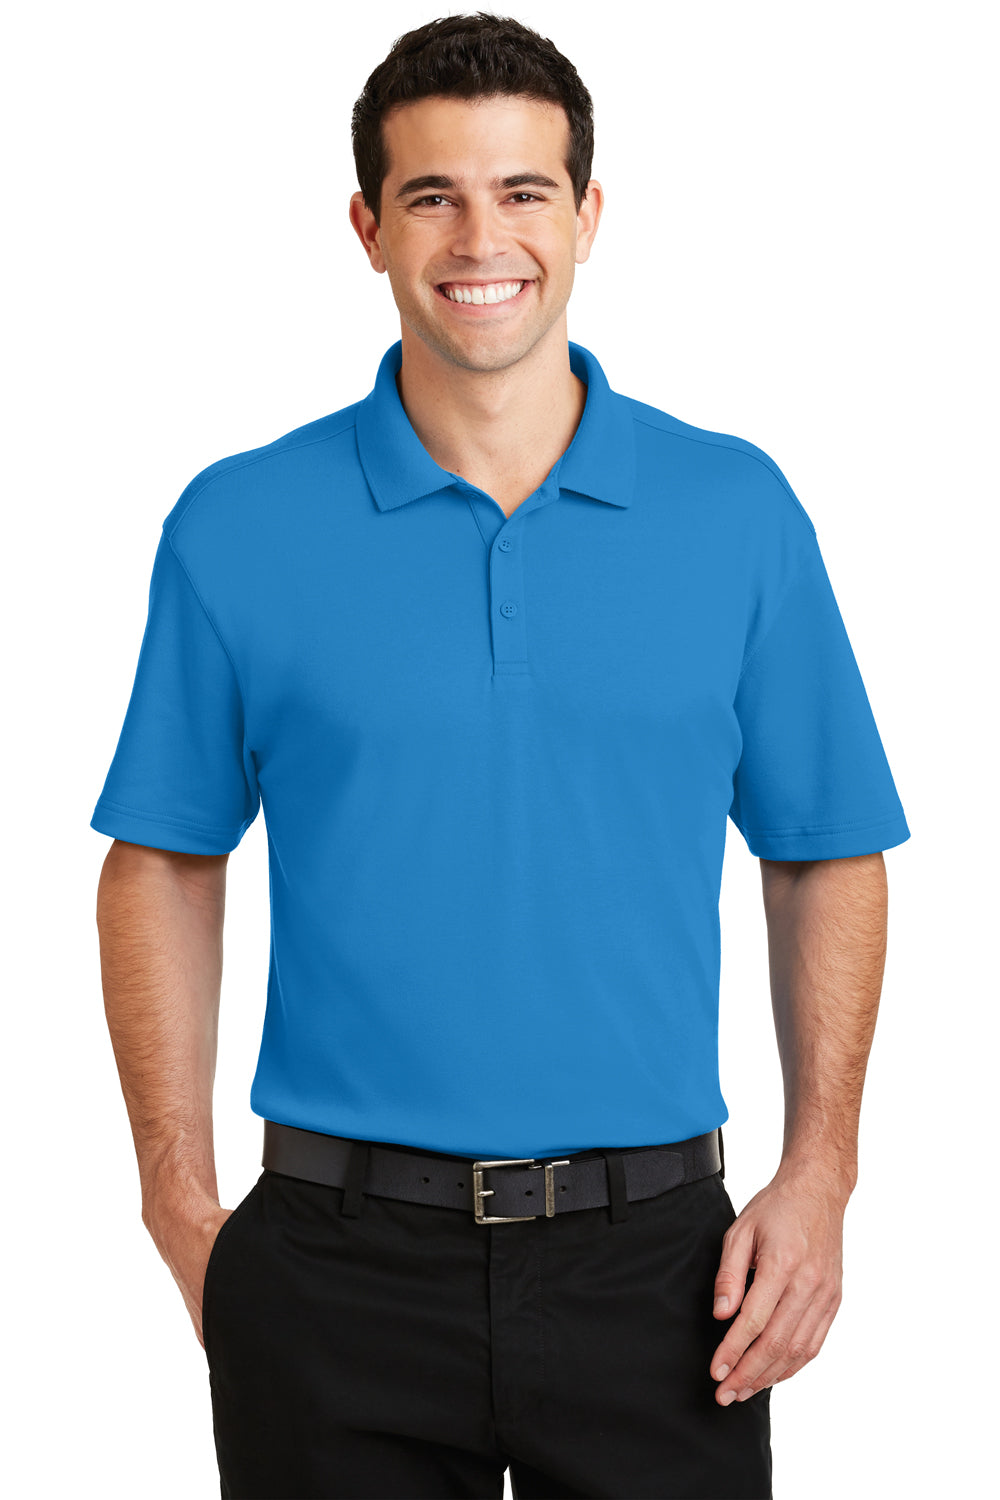 Port Authority K5200 Mens Silk Touch Performance Moisture Wicking Short Sleeve Polo Shirt Brilliant Blue Front